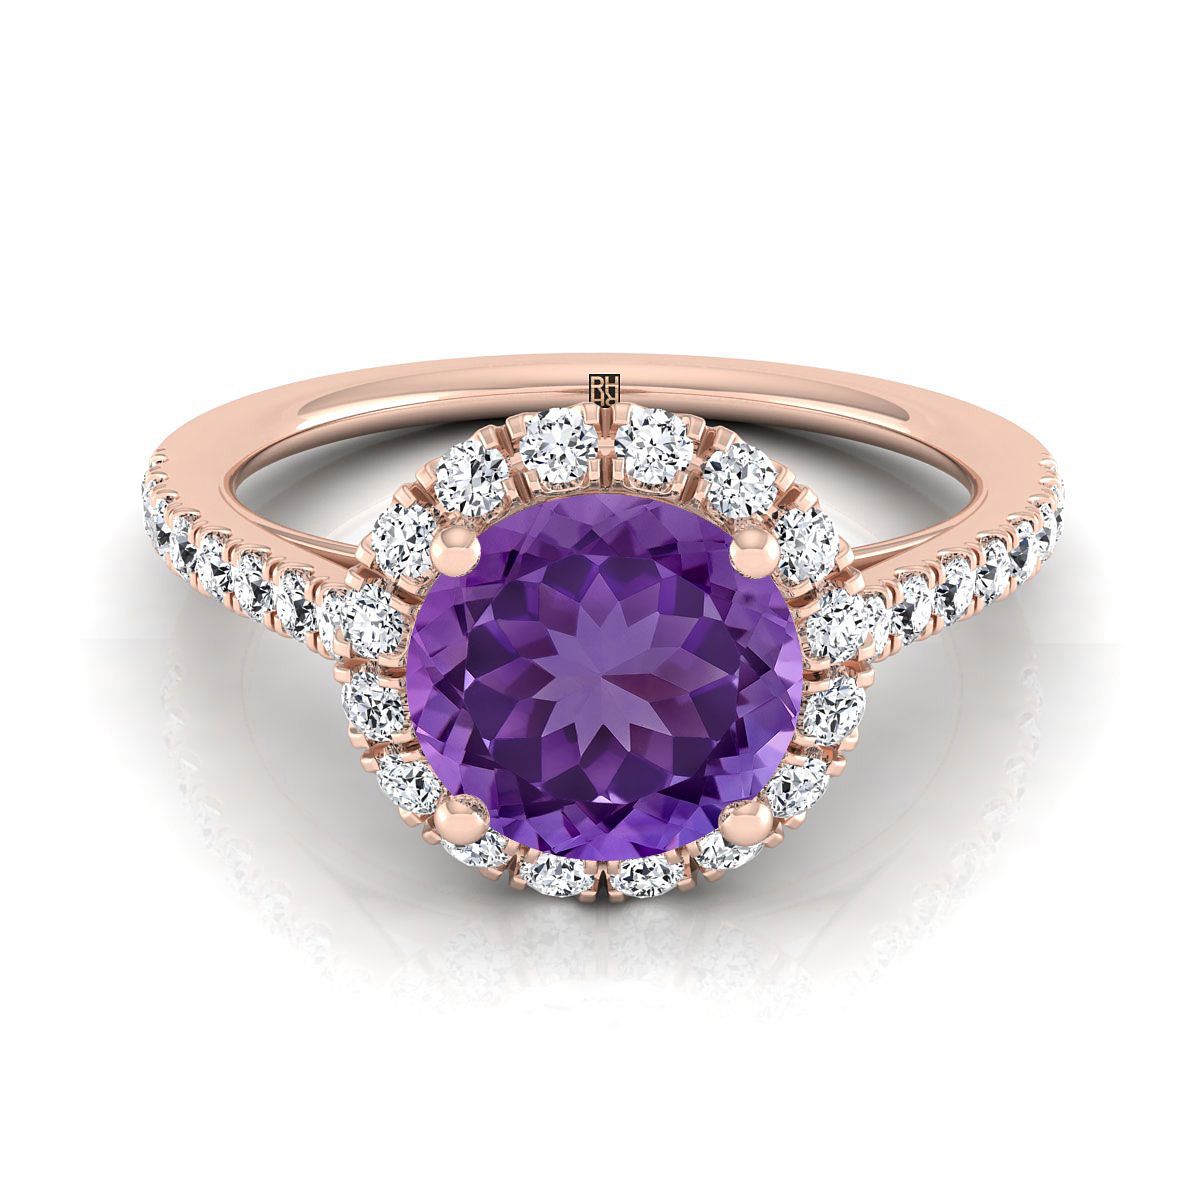 14K Rose Gold Round Brilliant Amethyst Petite Halo French Diamond Pave Engagement Ring -3/8ctw